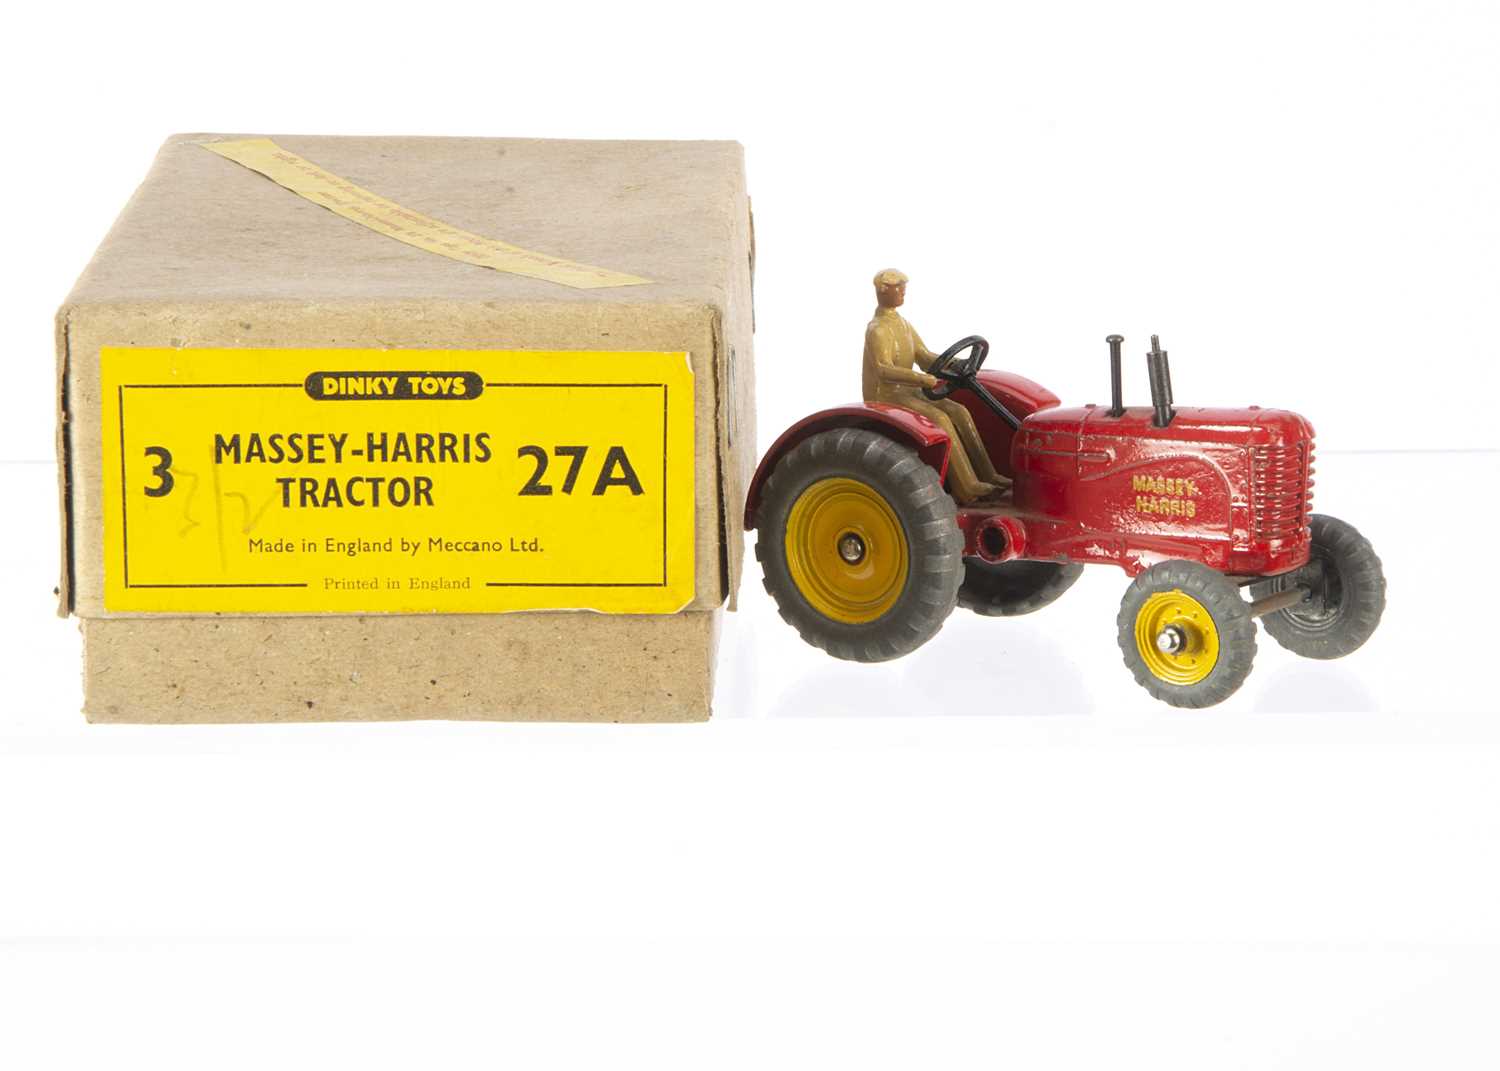 Lot 13 - A Dinky Toys 27a Massey-Harris Tractor Trade Box